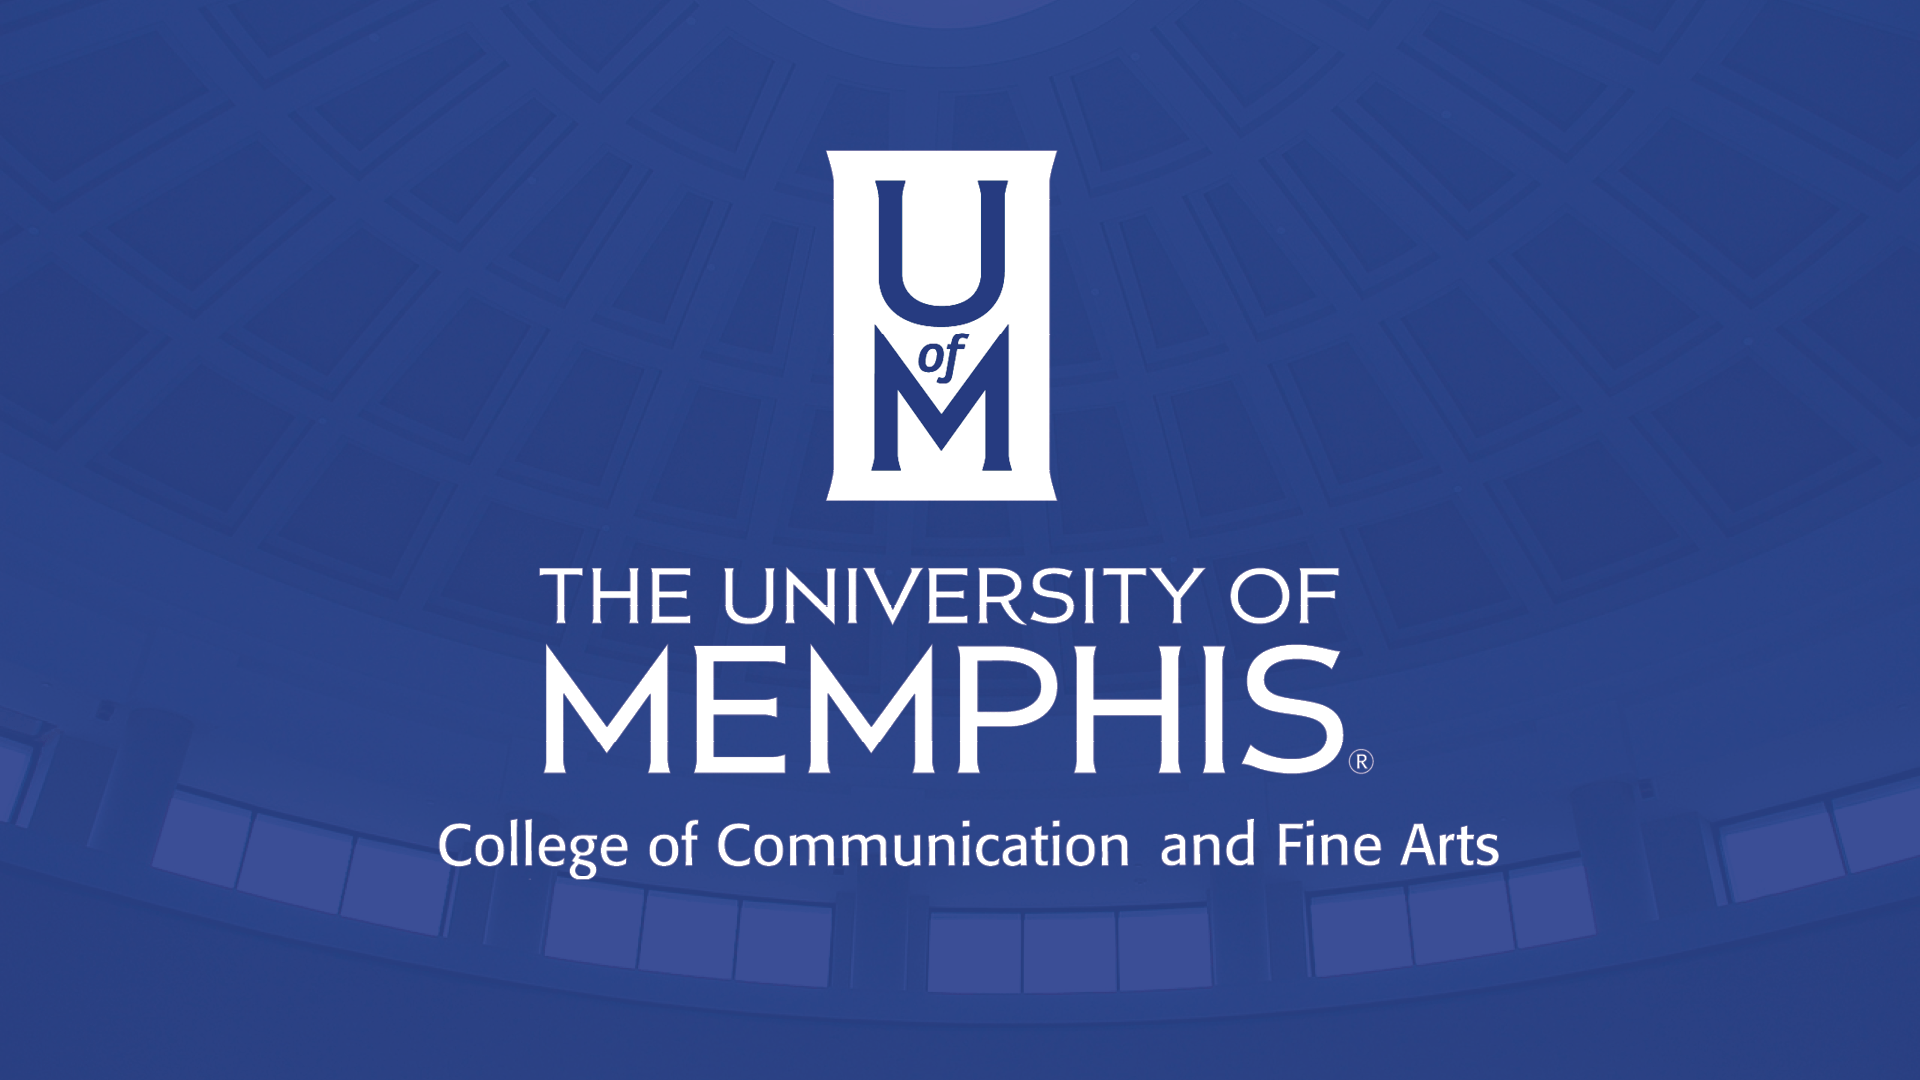 UofM College of Communication and Fine Arts